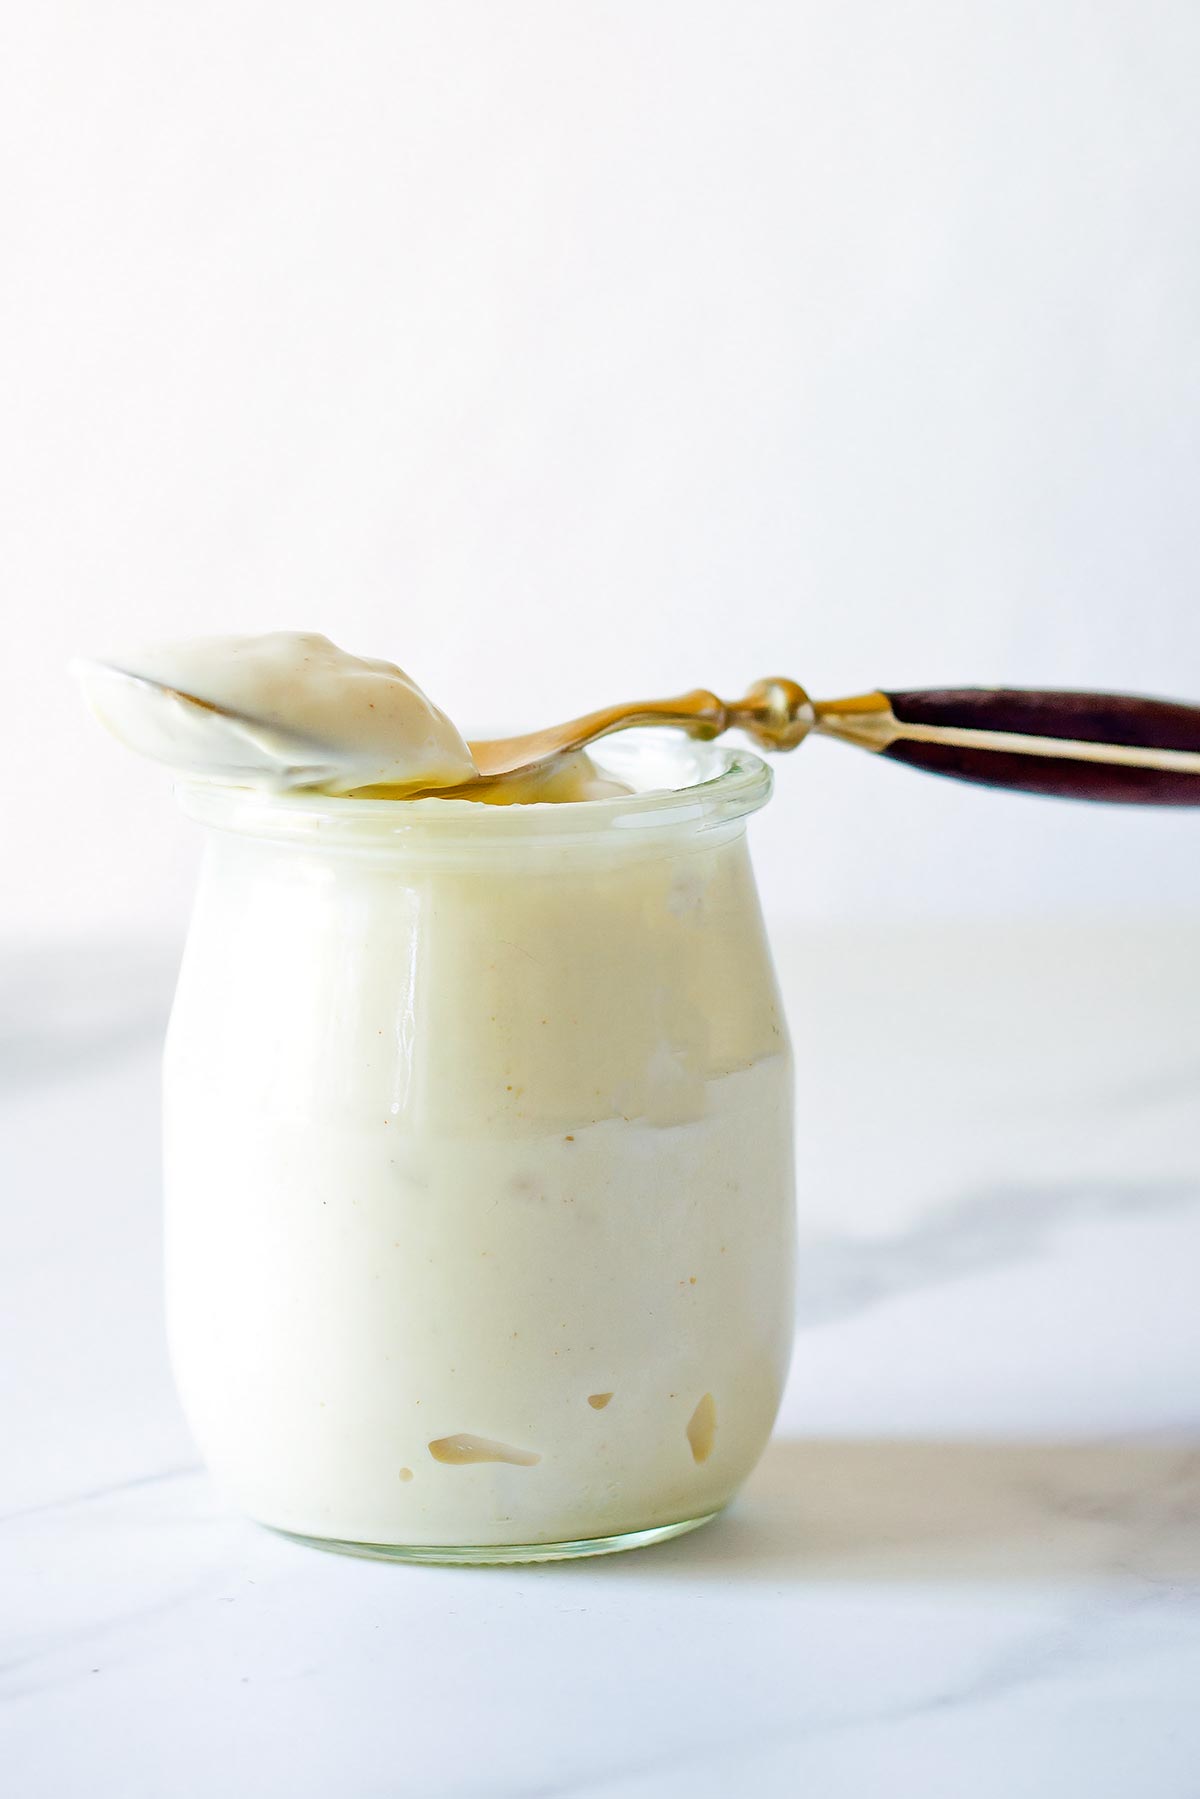 Spoonful of mayo on top of a small jar